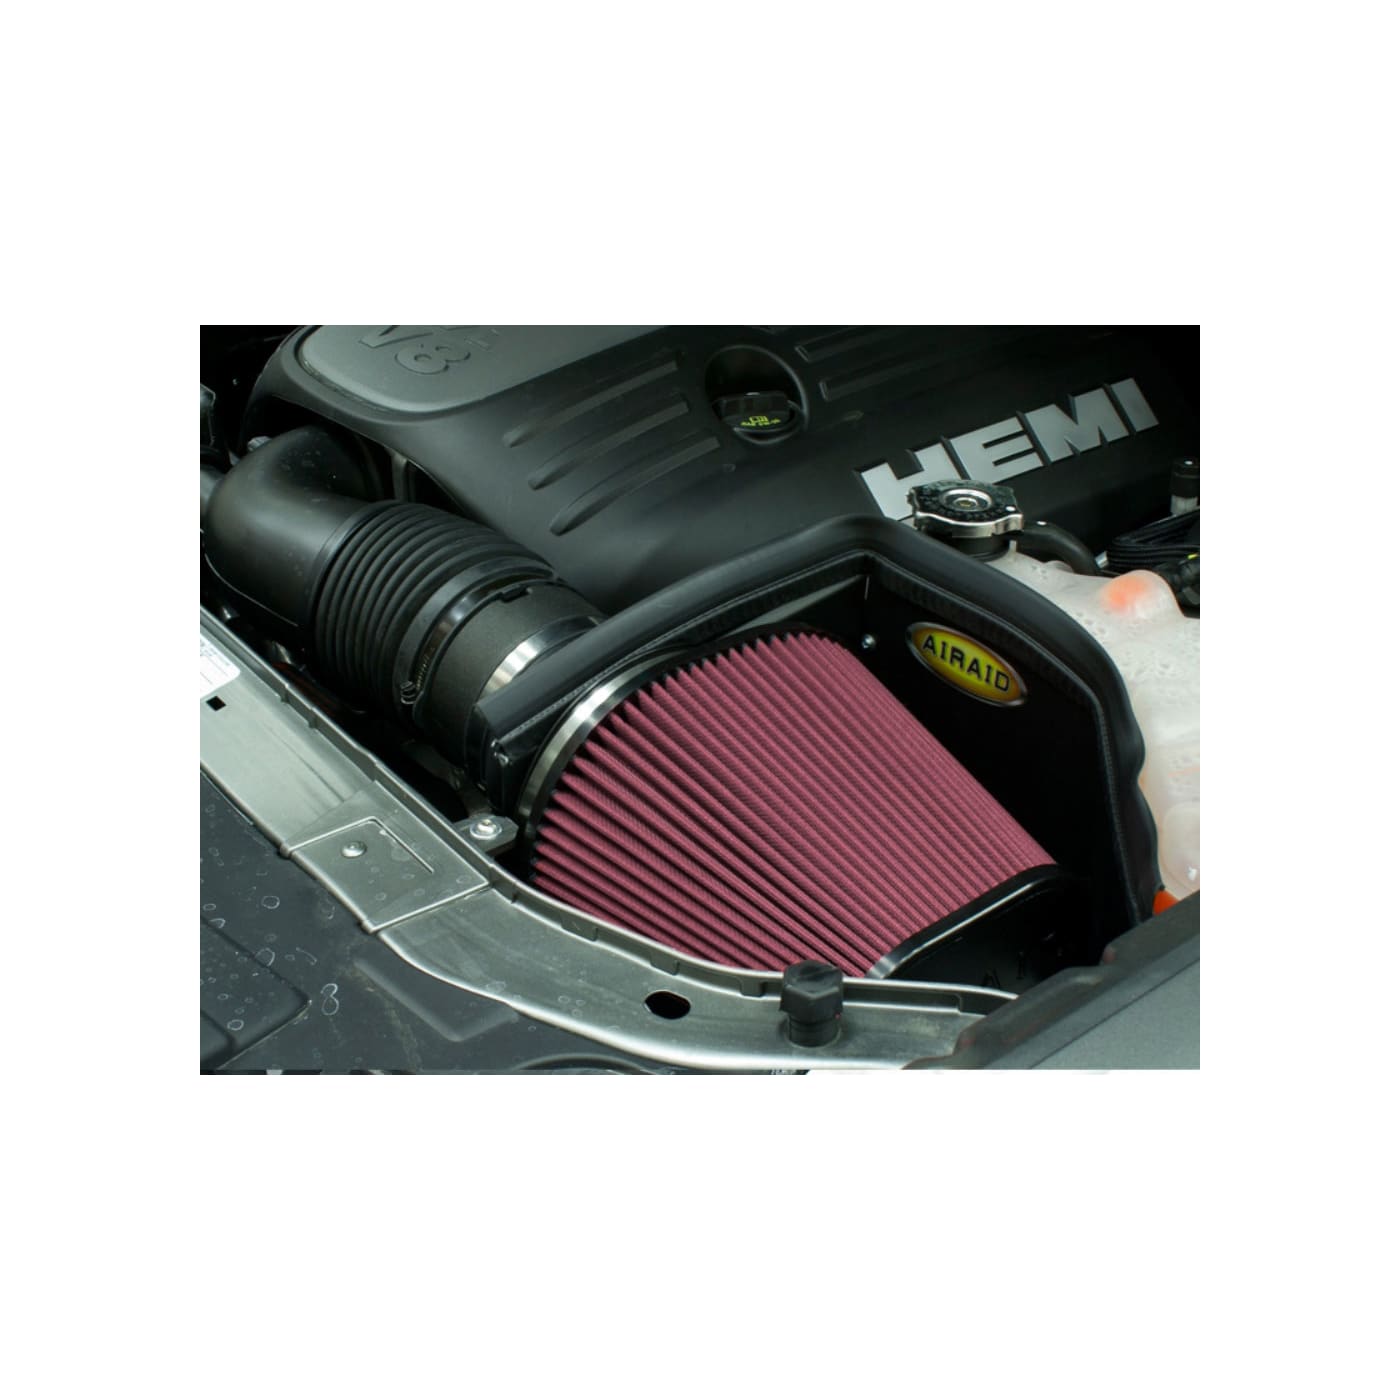 Airaid 350-210 Performance Cold Air Dam Air Intake System For Challenger/Charger